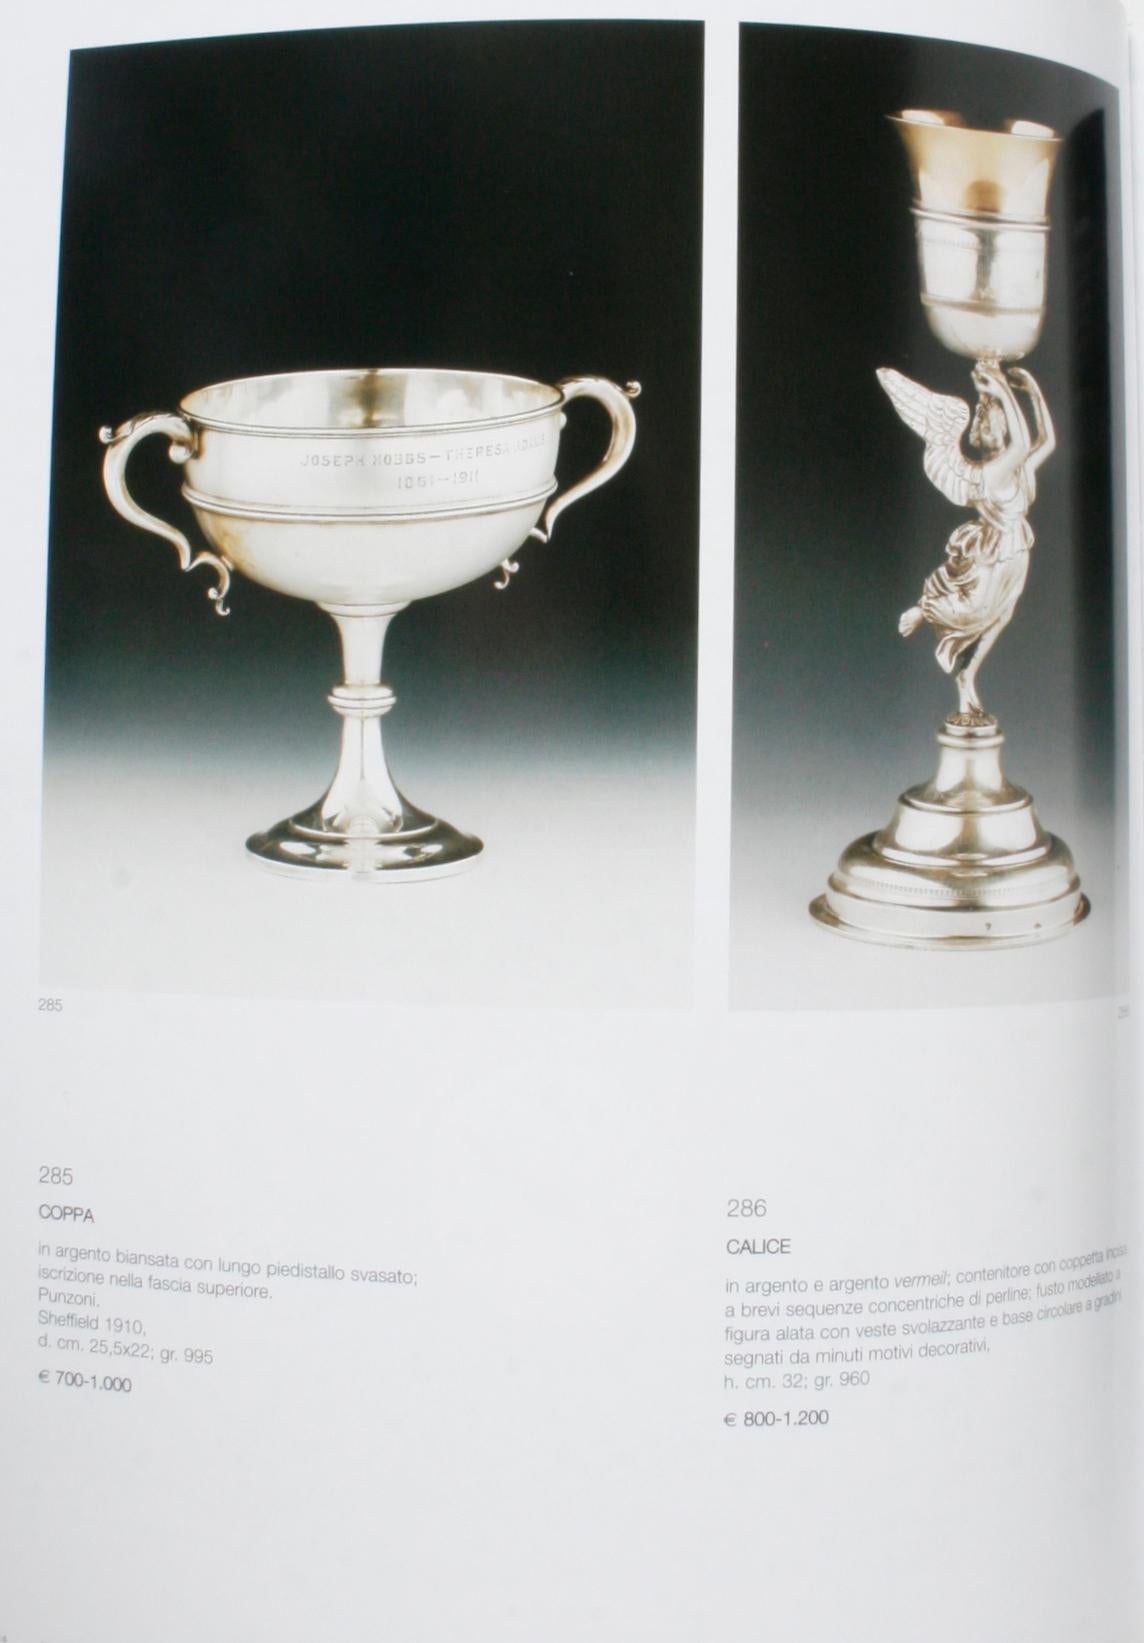 Auction Catalogue of Italian Fine Art, Silver, Ivory, and Venetian Objects, 2006 For Sale 11